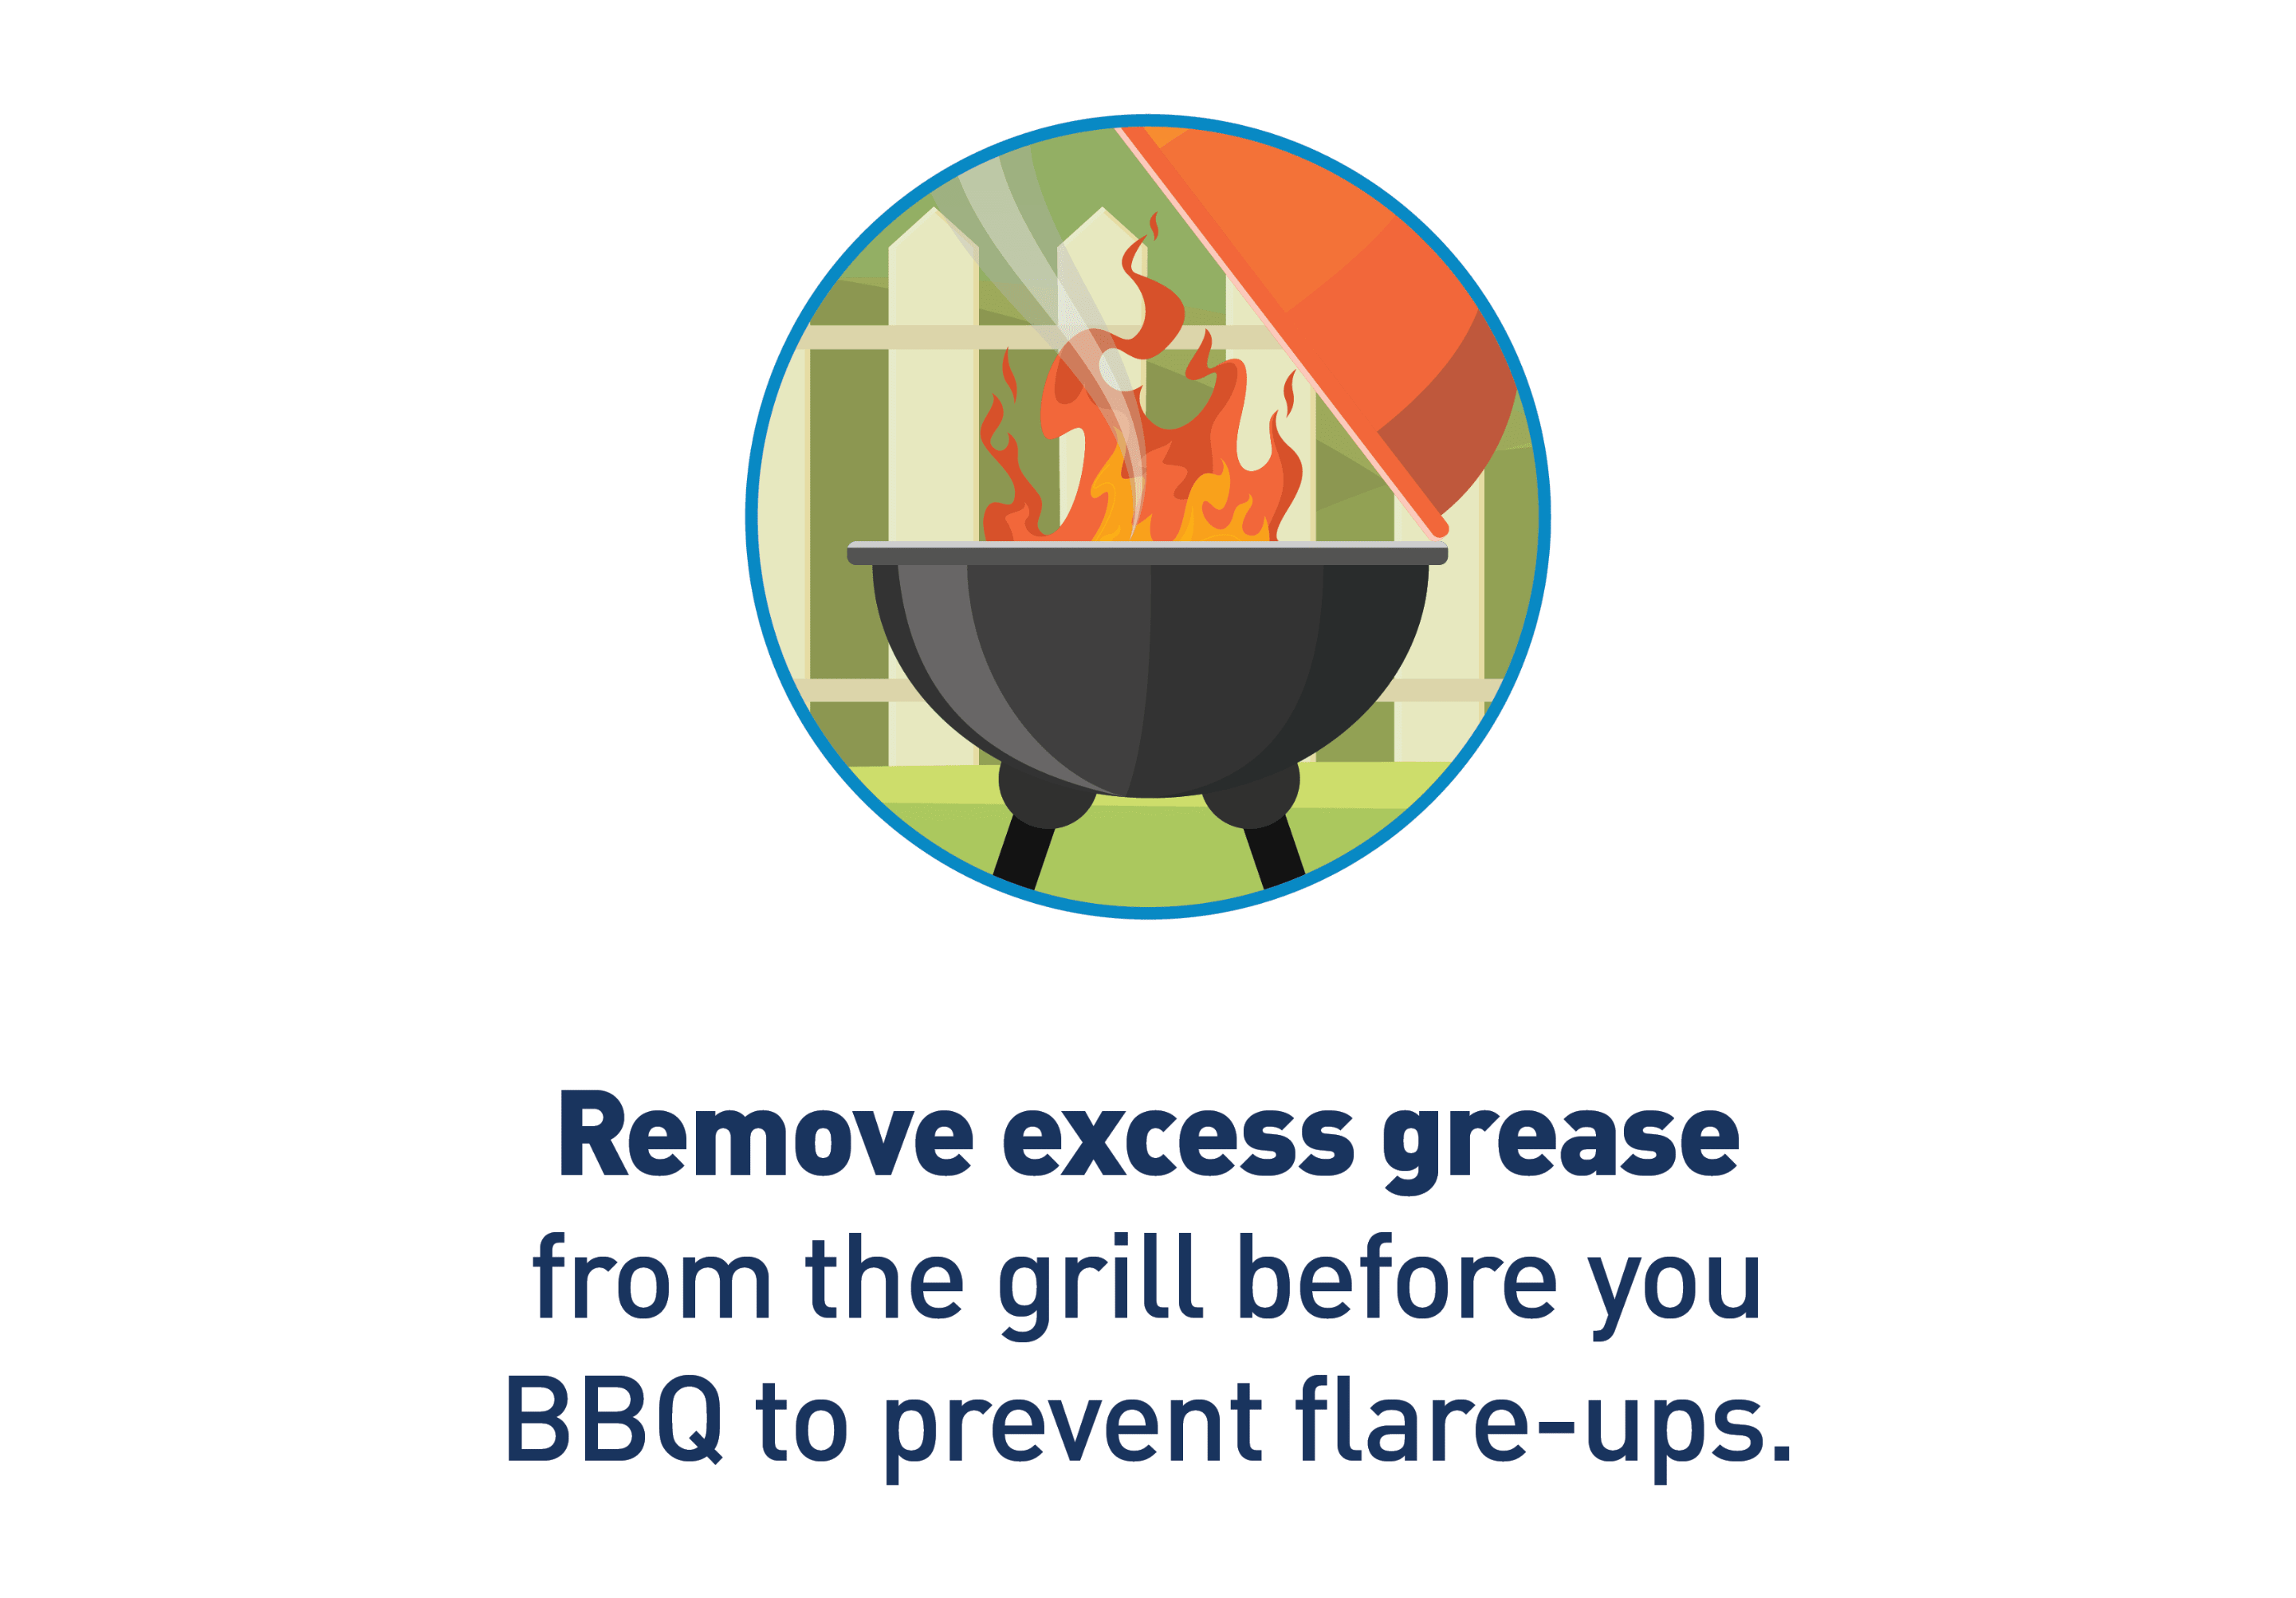 Image Description: Graphic of barbecue with open flames. Text: Remove excess grease from the grill before you BBQ to prevent flare-ups.